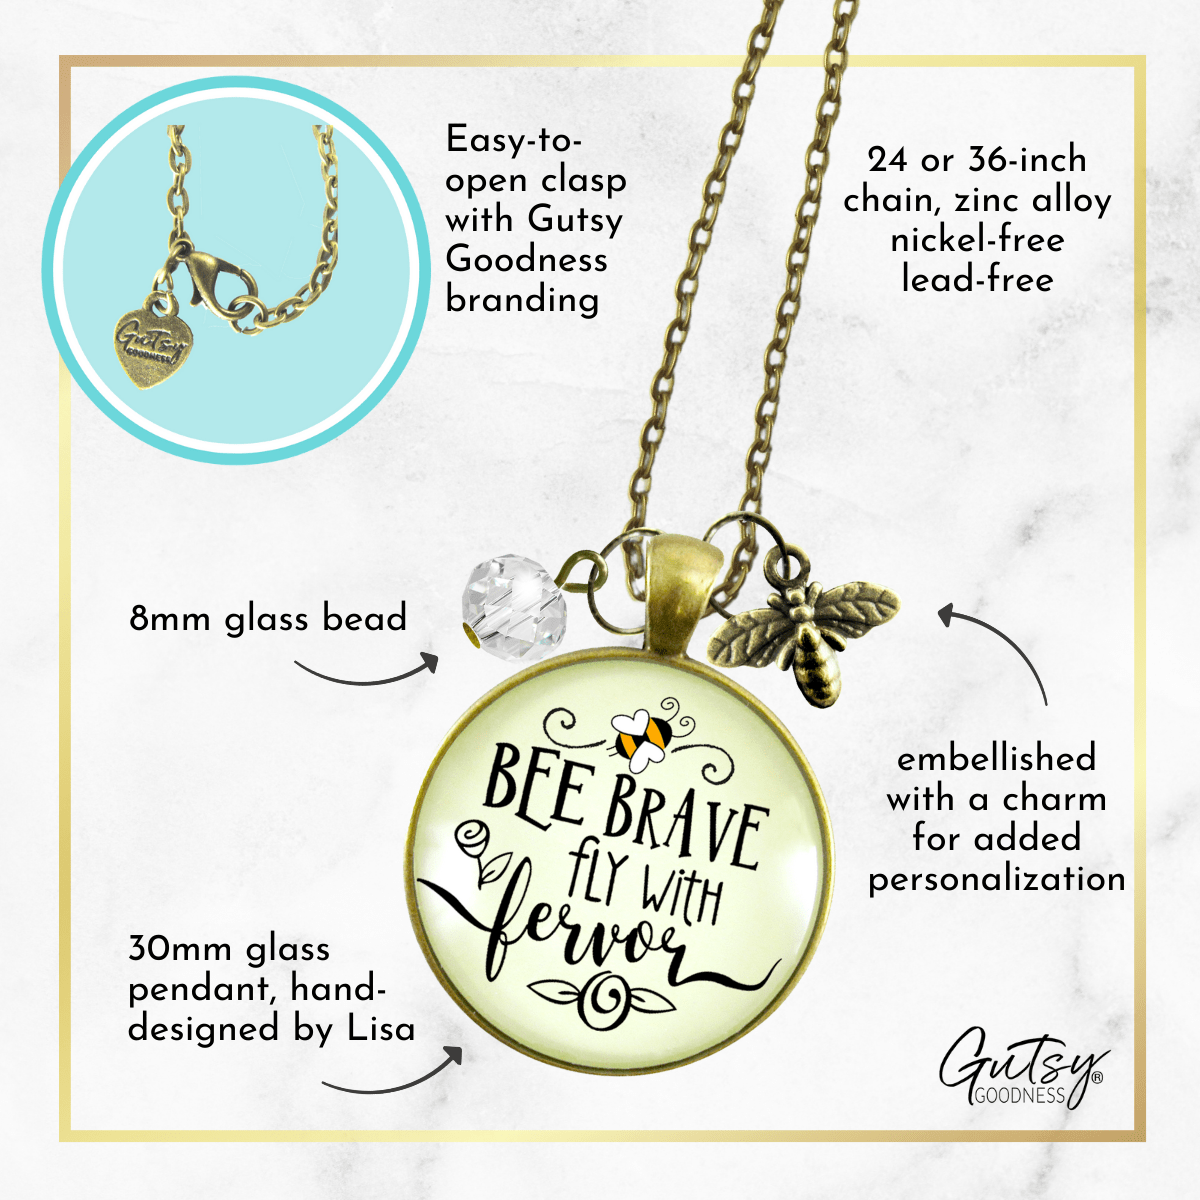 Gutsy Goodness Bee Brave Necklace Fly with Fervor Vintage Jewelry Dainty Bumble Bee - Gutsy Goodness Handmade Jewelry;Bee Brave Necklace Fly With Fervor Vintage Jewelry Dainty Bumble Bee - Gutsy Goodness Handmade Jewelry Gifts